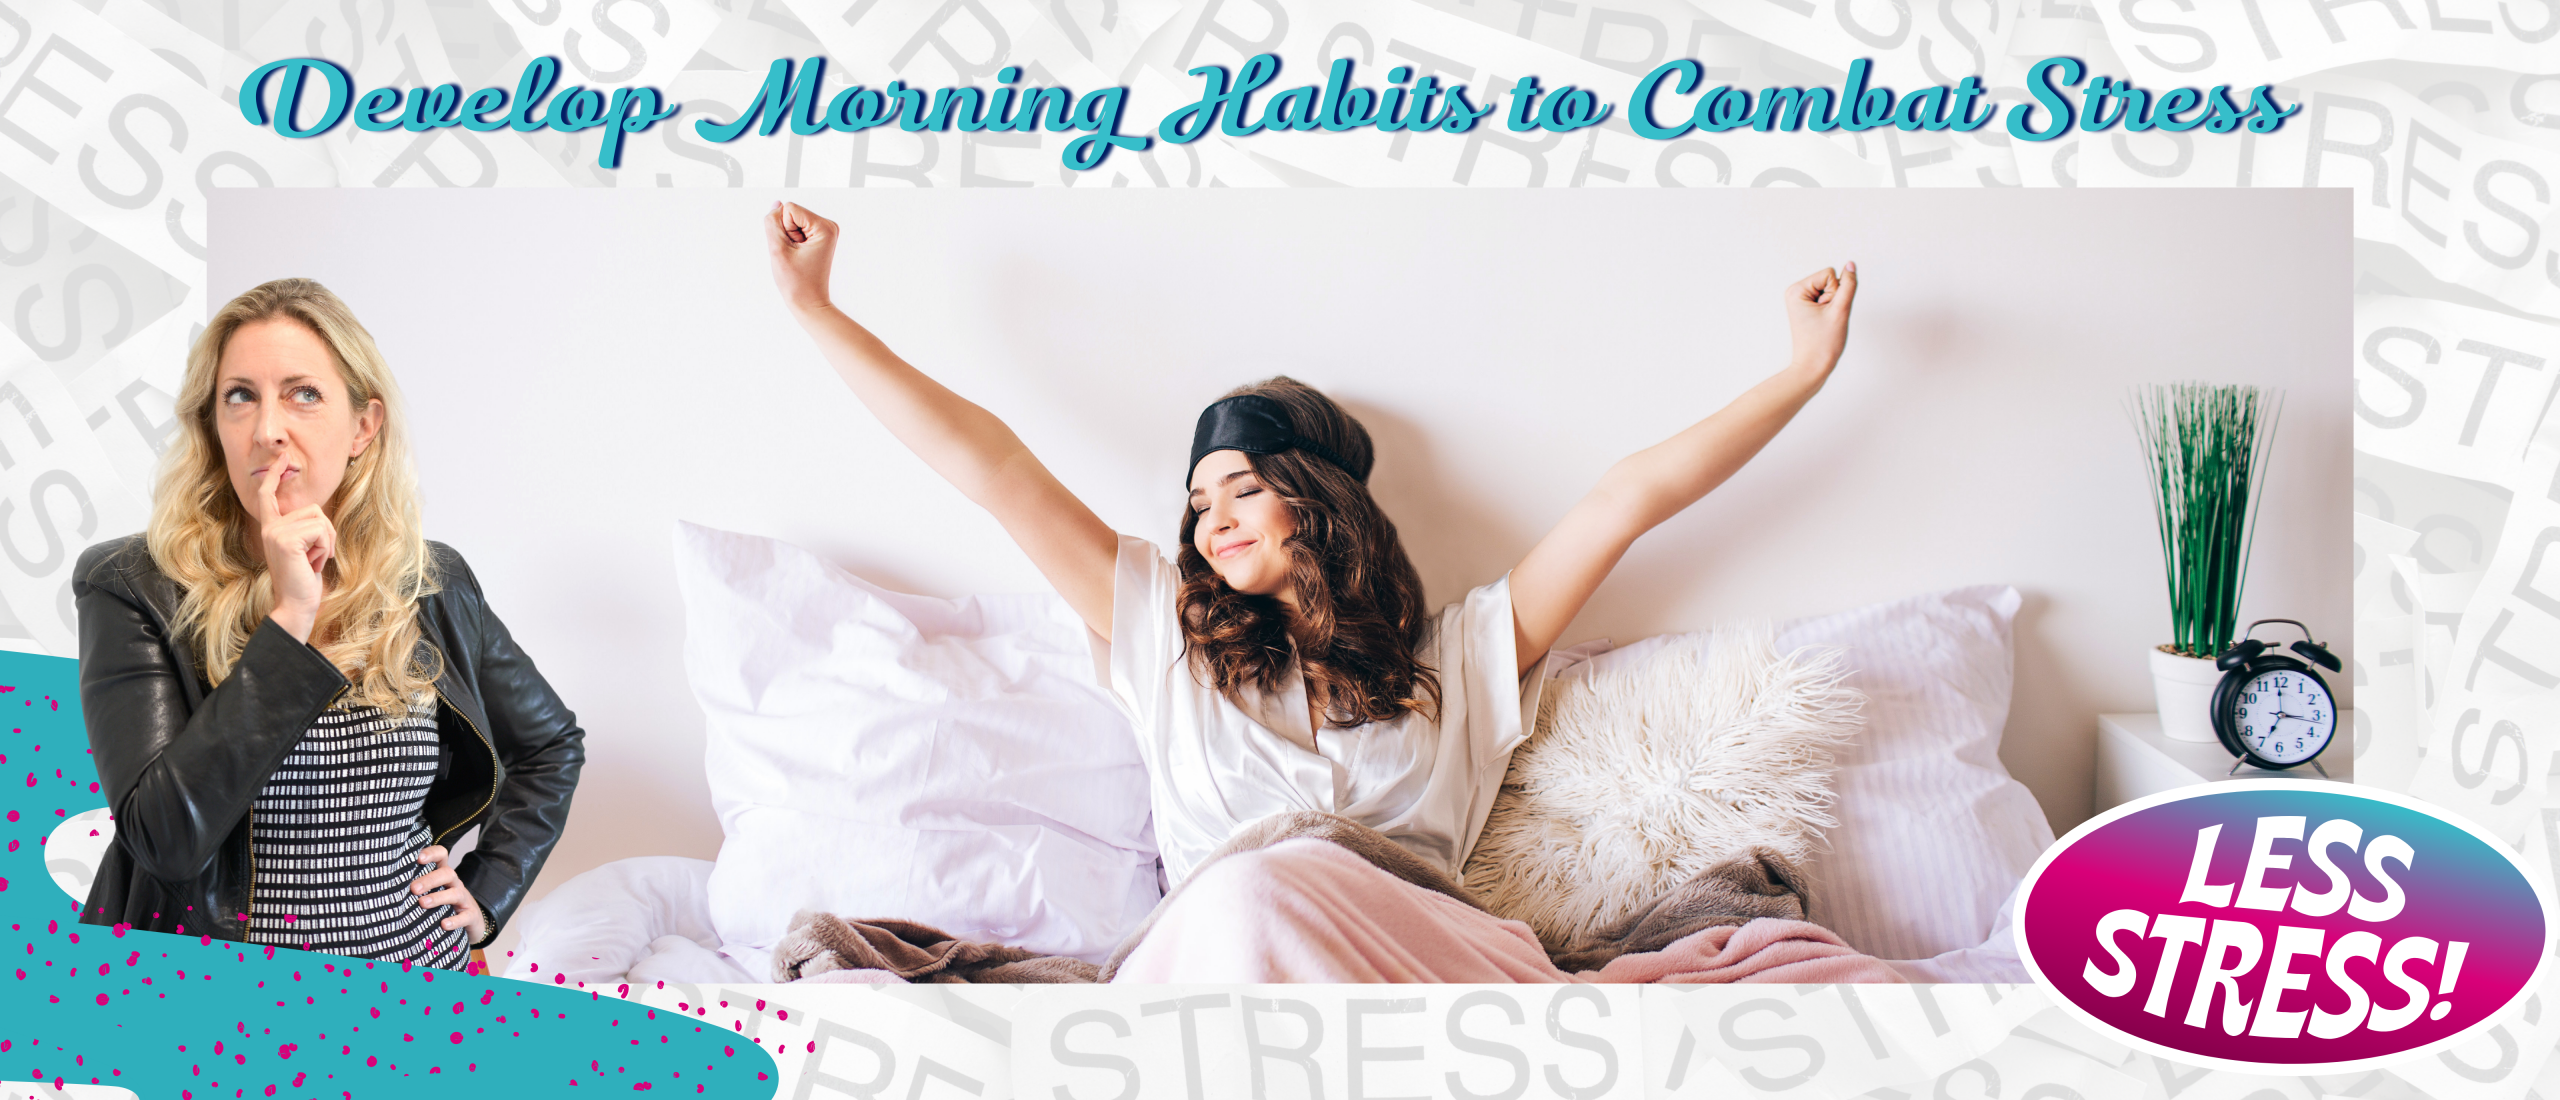 Develop Morning Habits to Combat Stress